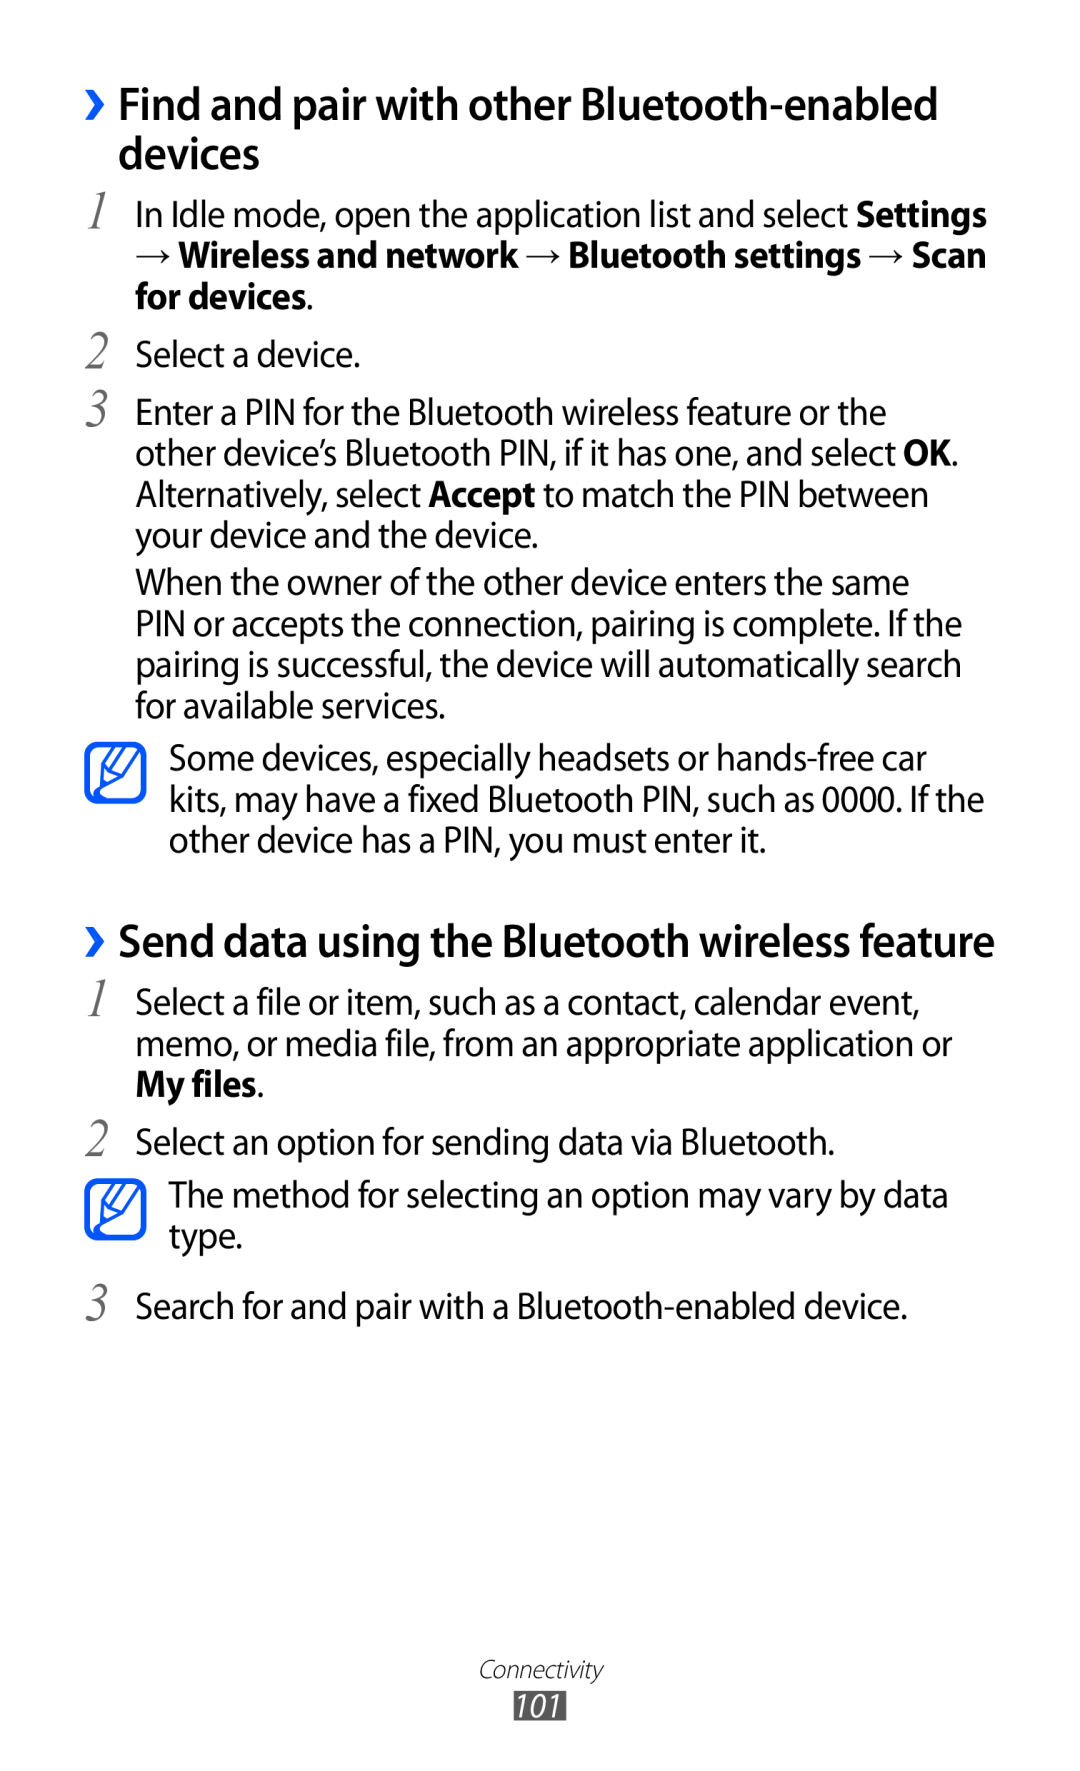 Samsung GT-I9070 ››Find and pair with other Bluetooth-enabled devices, ››Send data using the Bluetooth wireless feature 